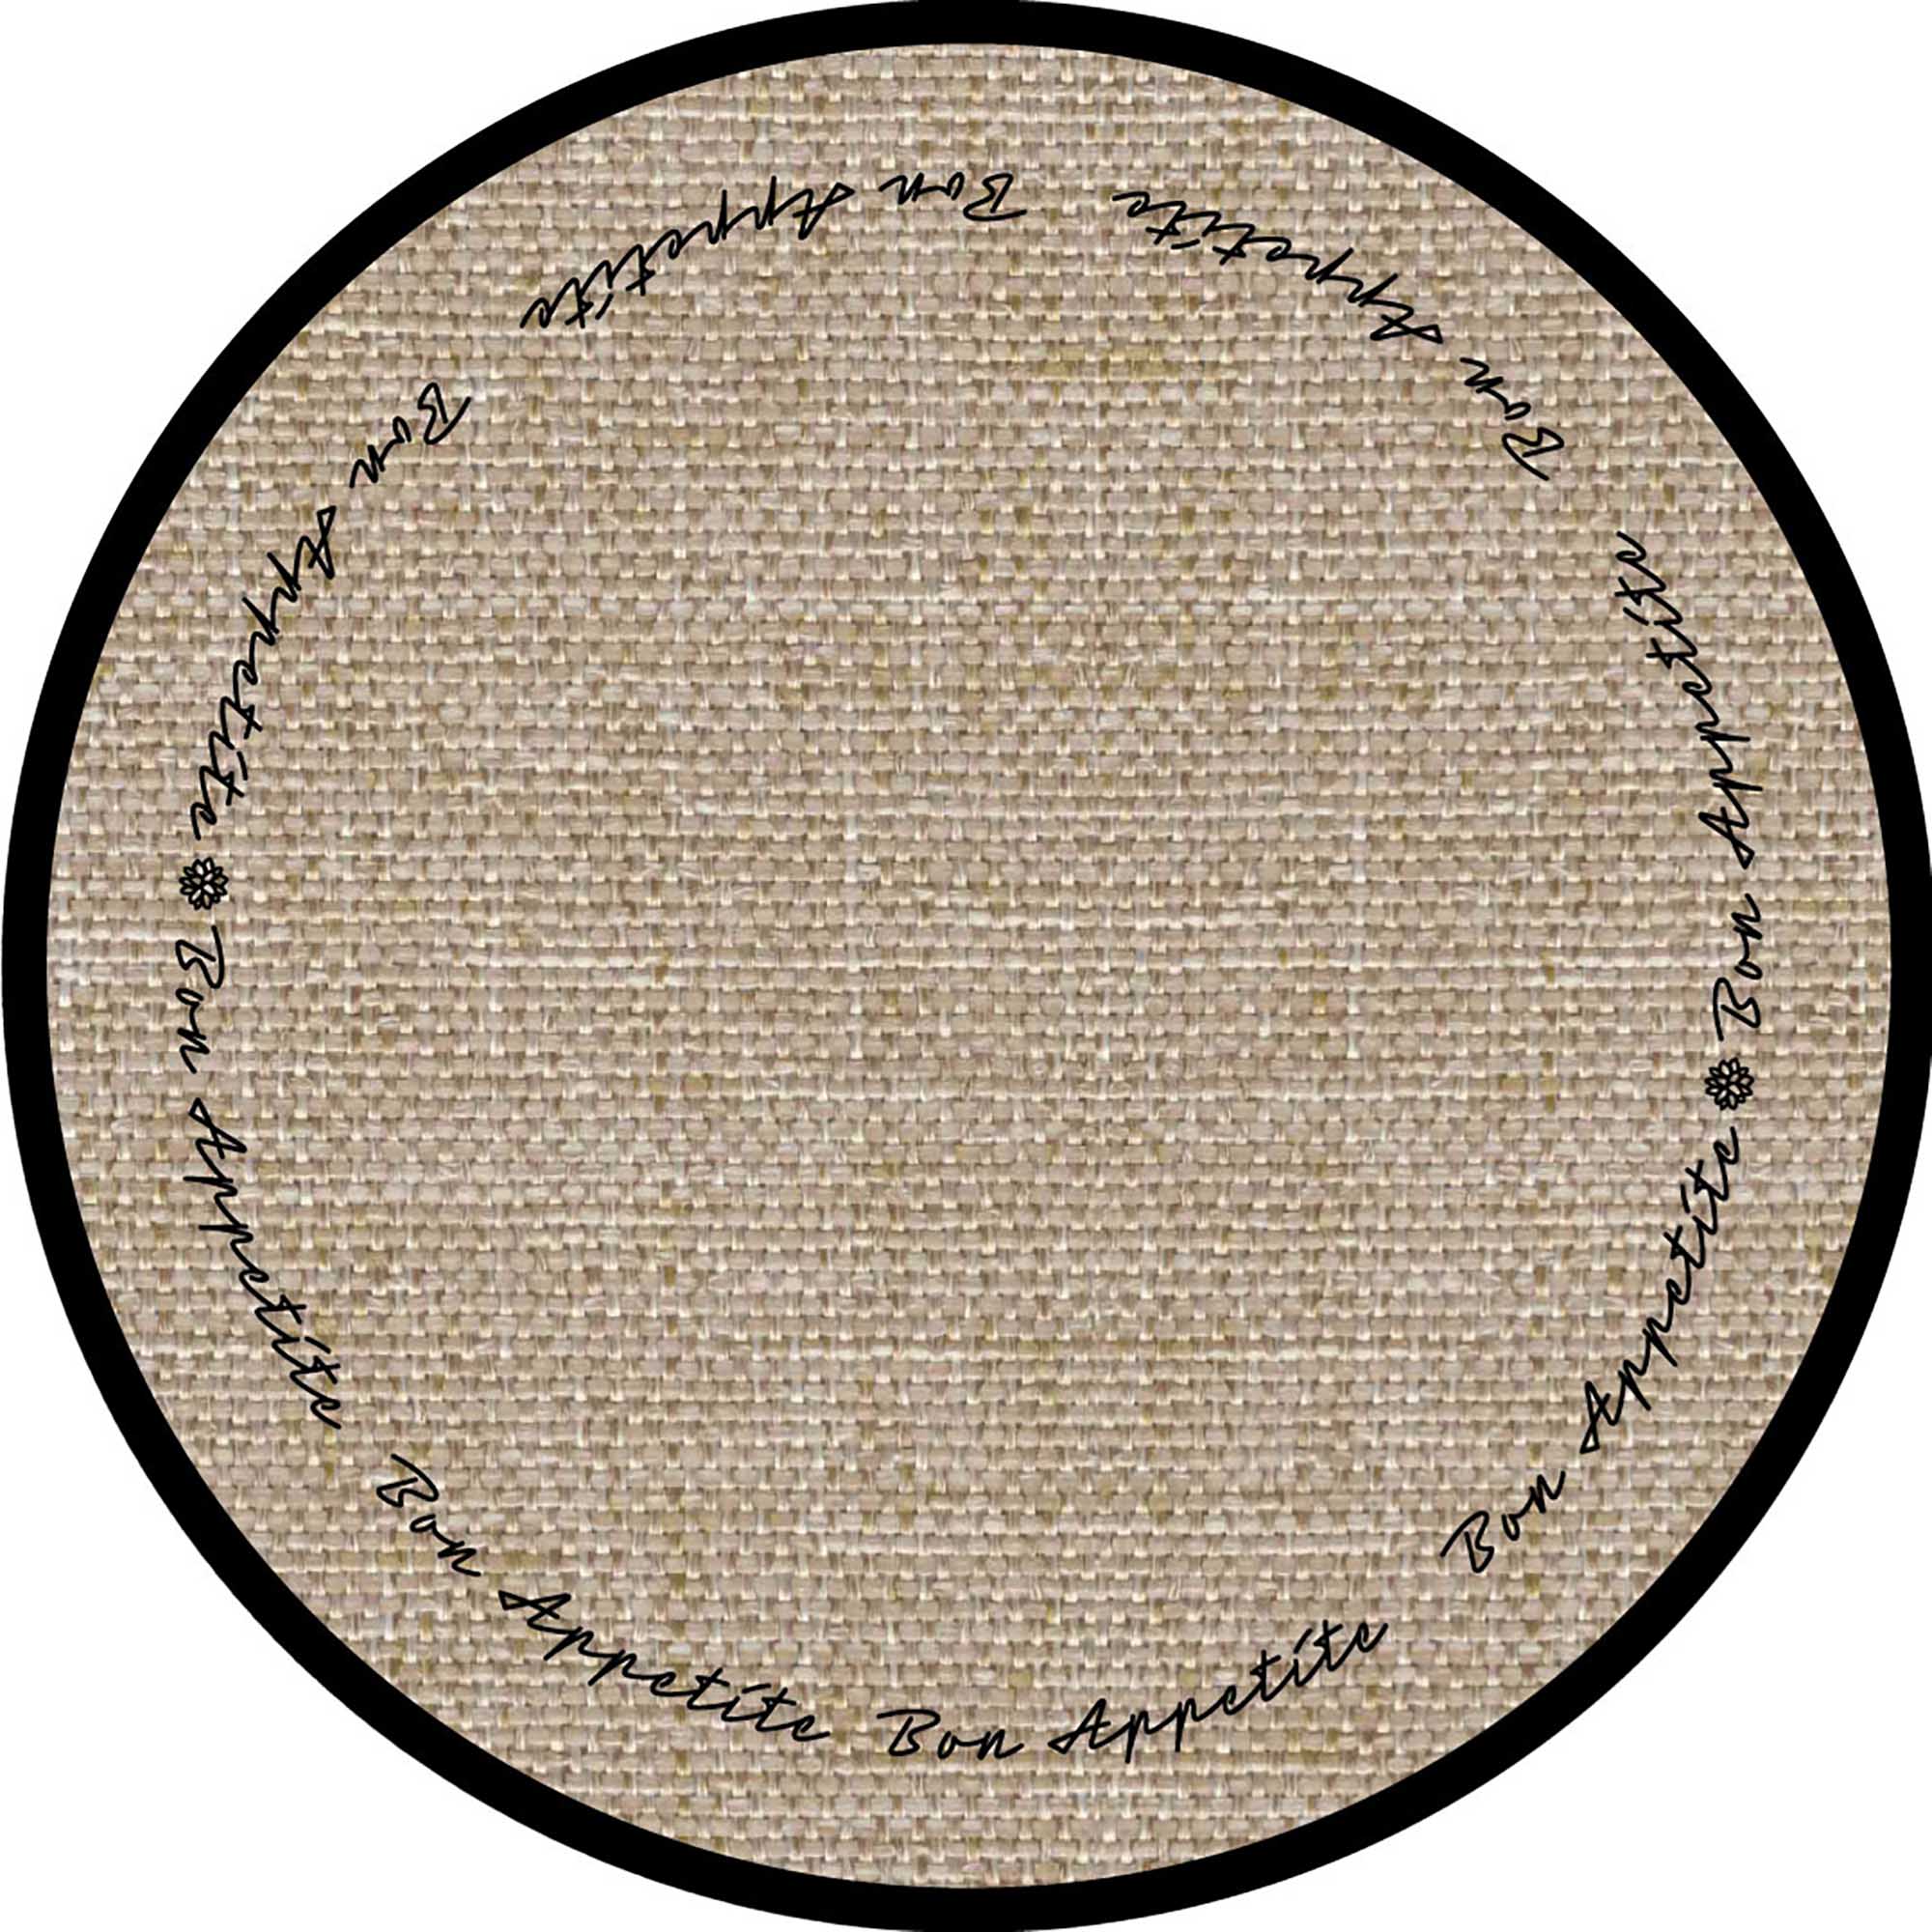 Bon Appétit Round Beige Placemat with Black Writing - Fabric 15in dia.